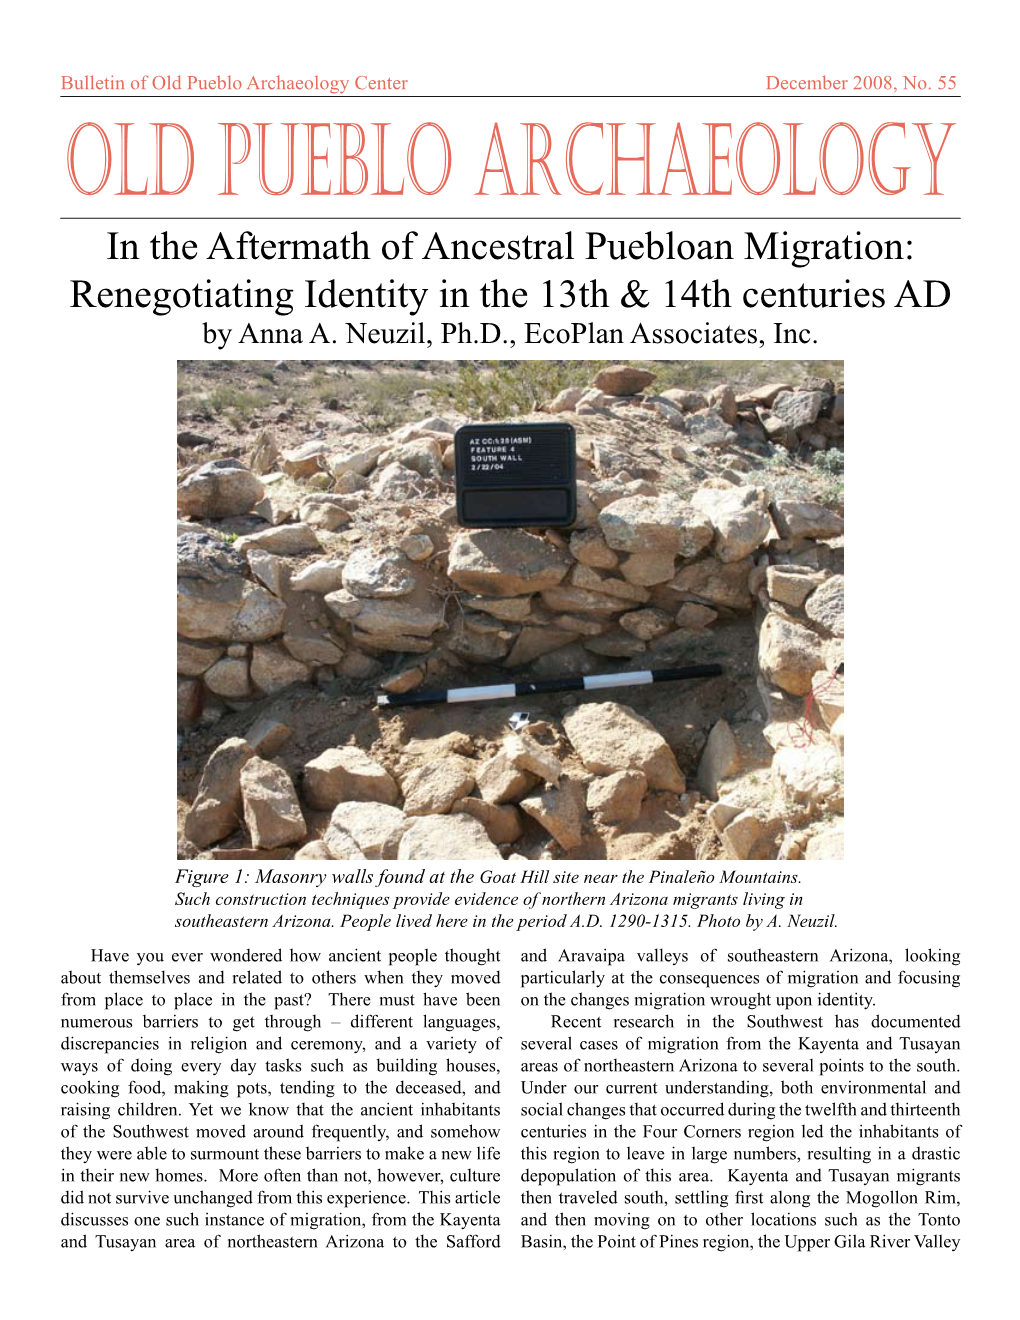 Aftermath of Ancestral Puebloan Migration: Renegotiating Identity in the 13Th & 14Th Centuries AD by Anna A